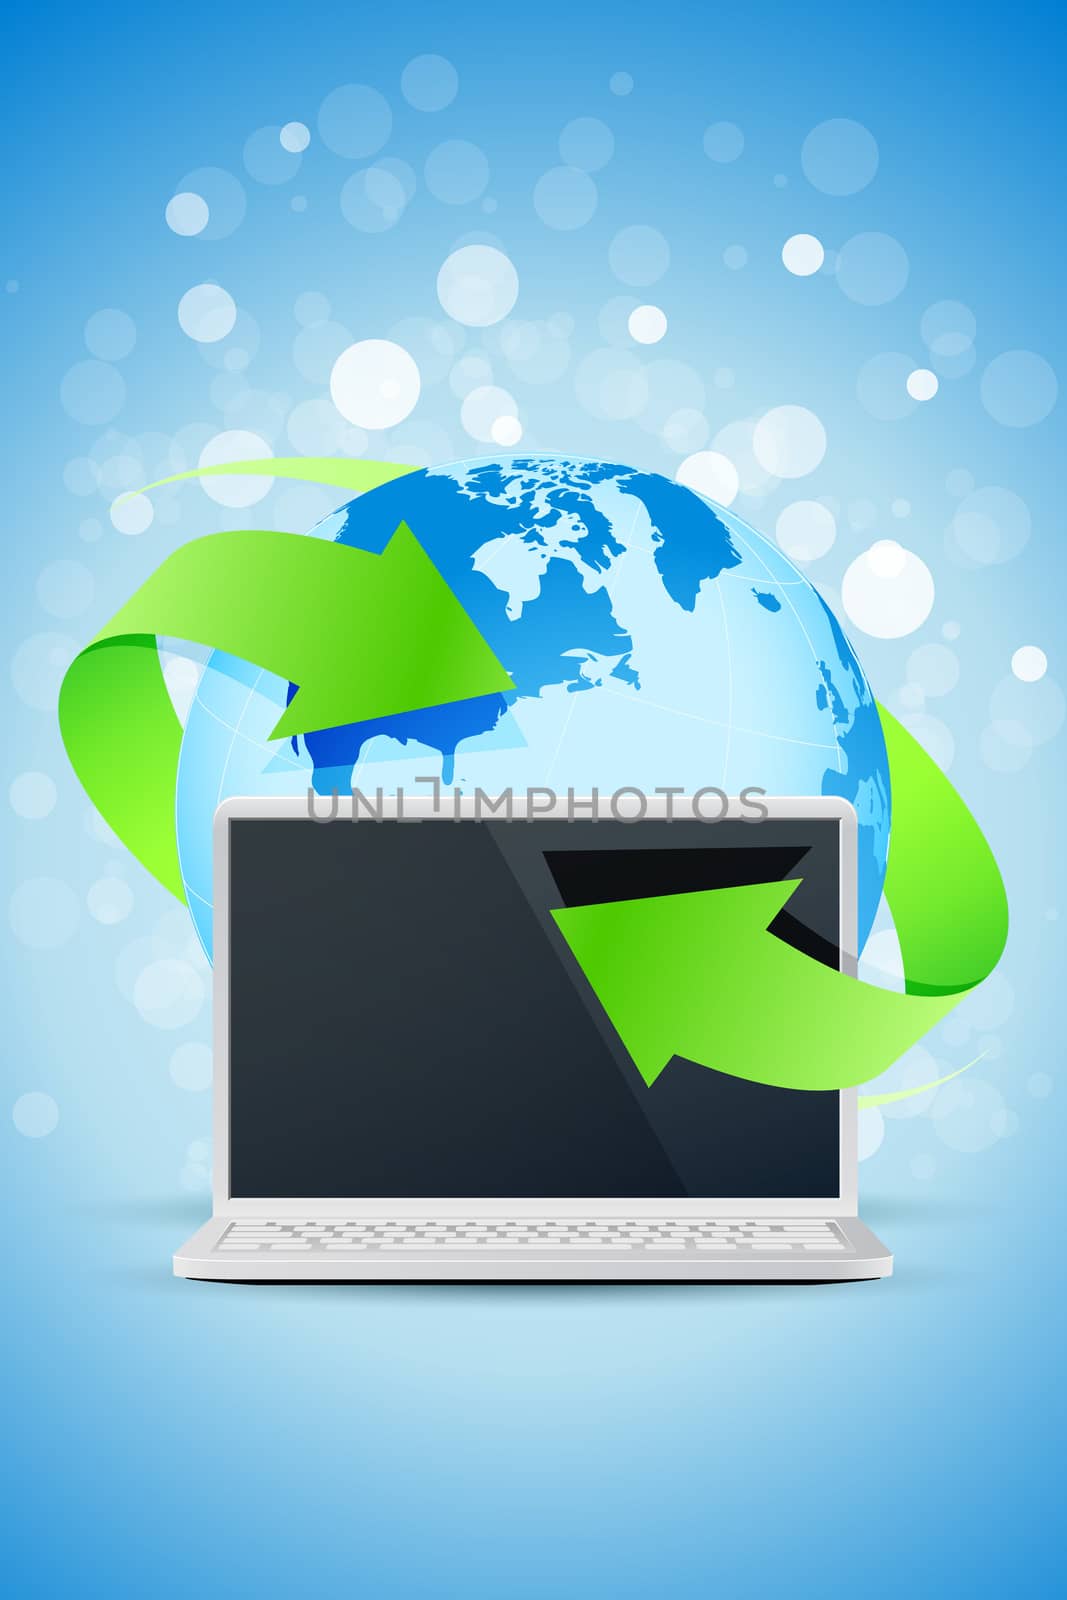 Background with Laptop and Earth Globe by WaD